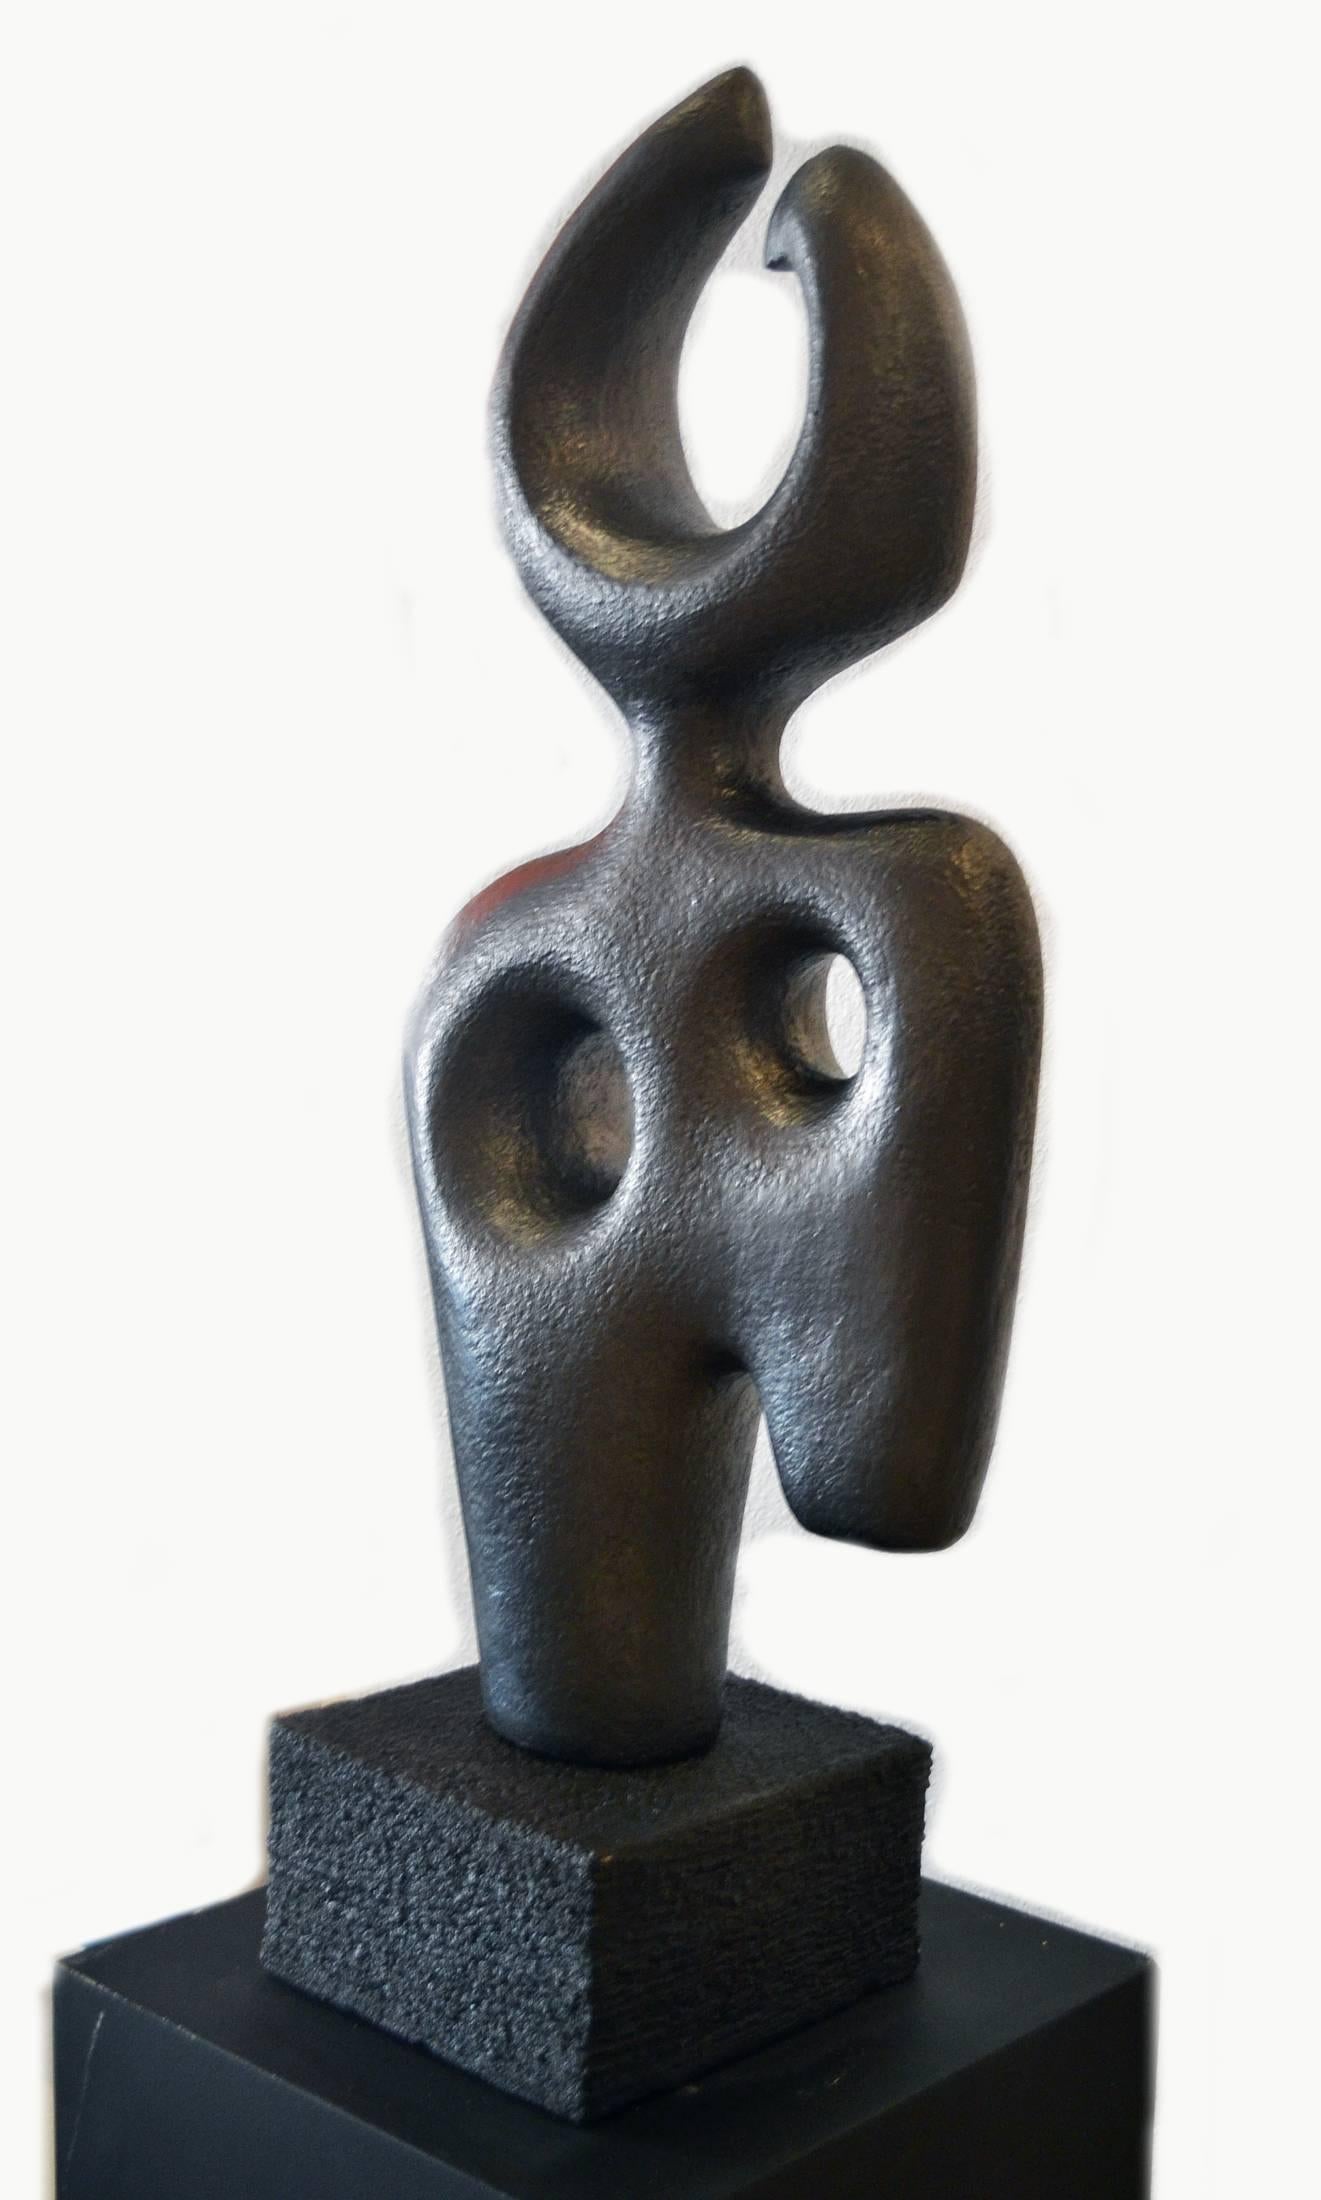 Striking and elegant are but a few adjectives that describe this limited edition abstract figurative sculpture by Canadian artist Birgit Piskor, whose praises continue to be sung by an ever-growing list of collectors. 

Piskor applies a formulated